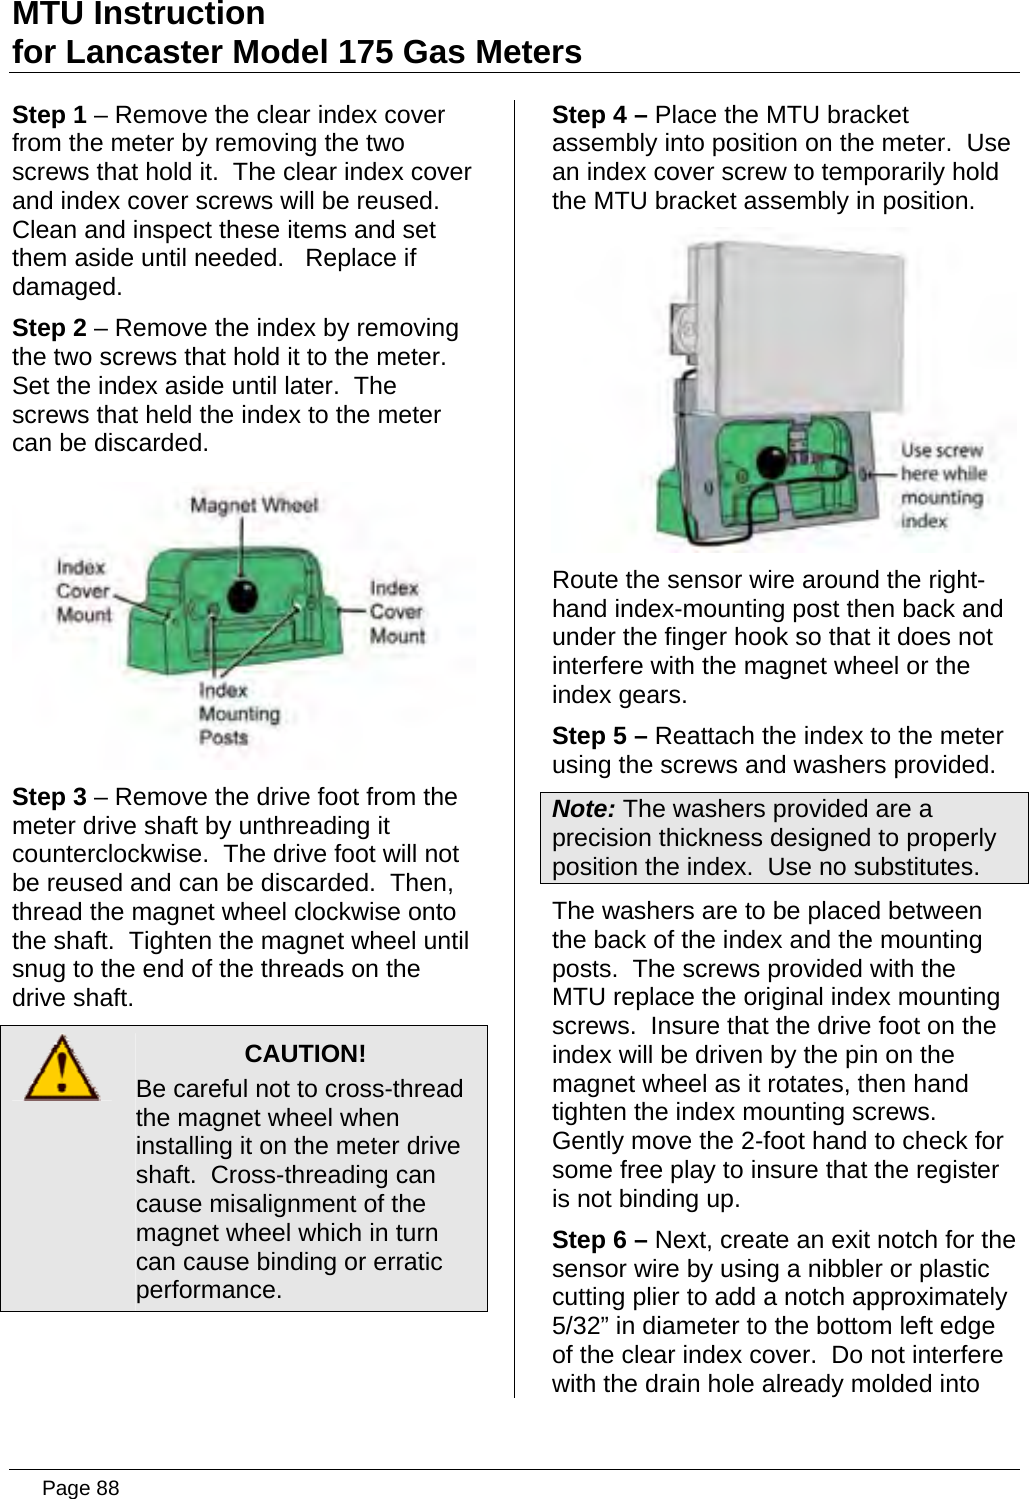 Page 88 of Aclara Technologies 09015 Transmitter for Meter Reading User Manual users manual